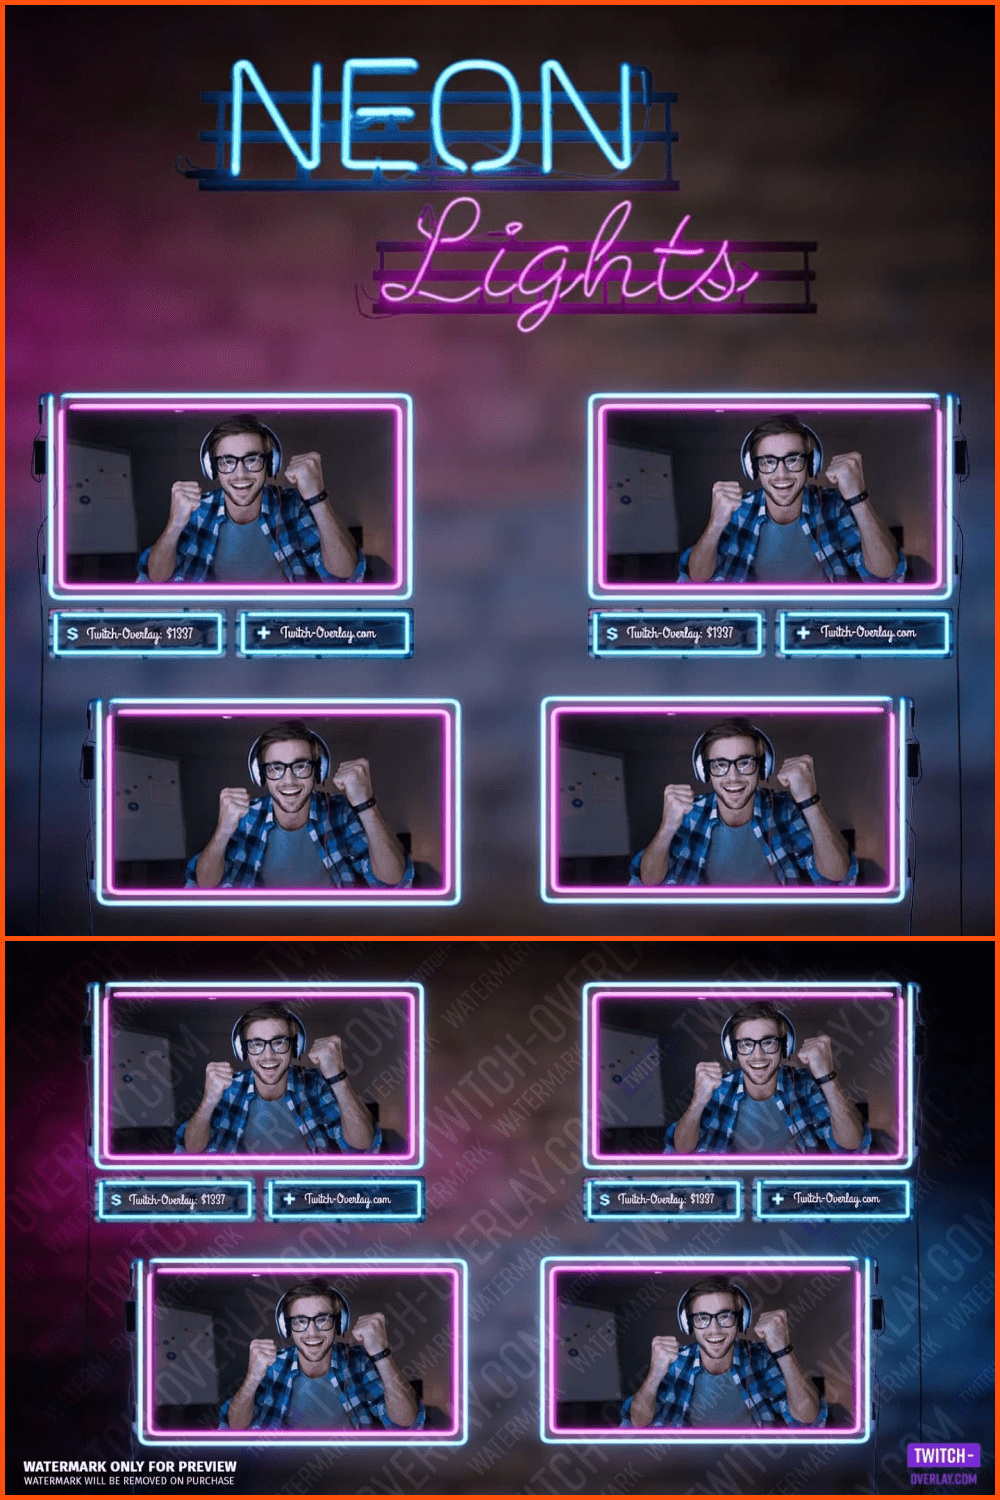 The Neon Light webcam overlay bundle, with its glourious night club vibe, will make your Twitch, YouTube or Facebook stream a real Highlight.